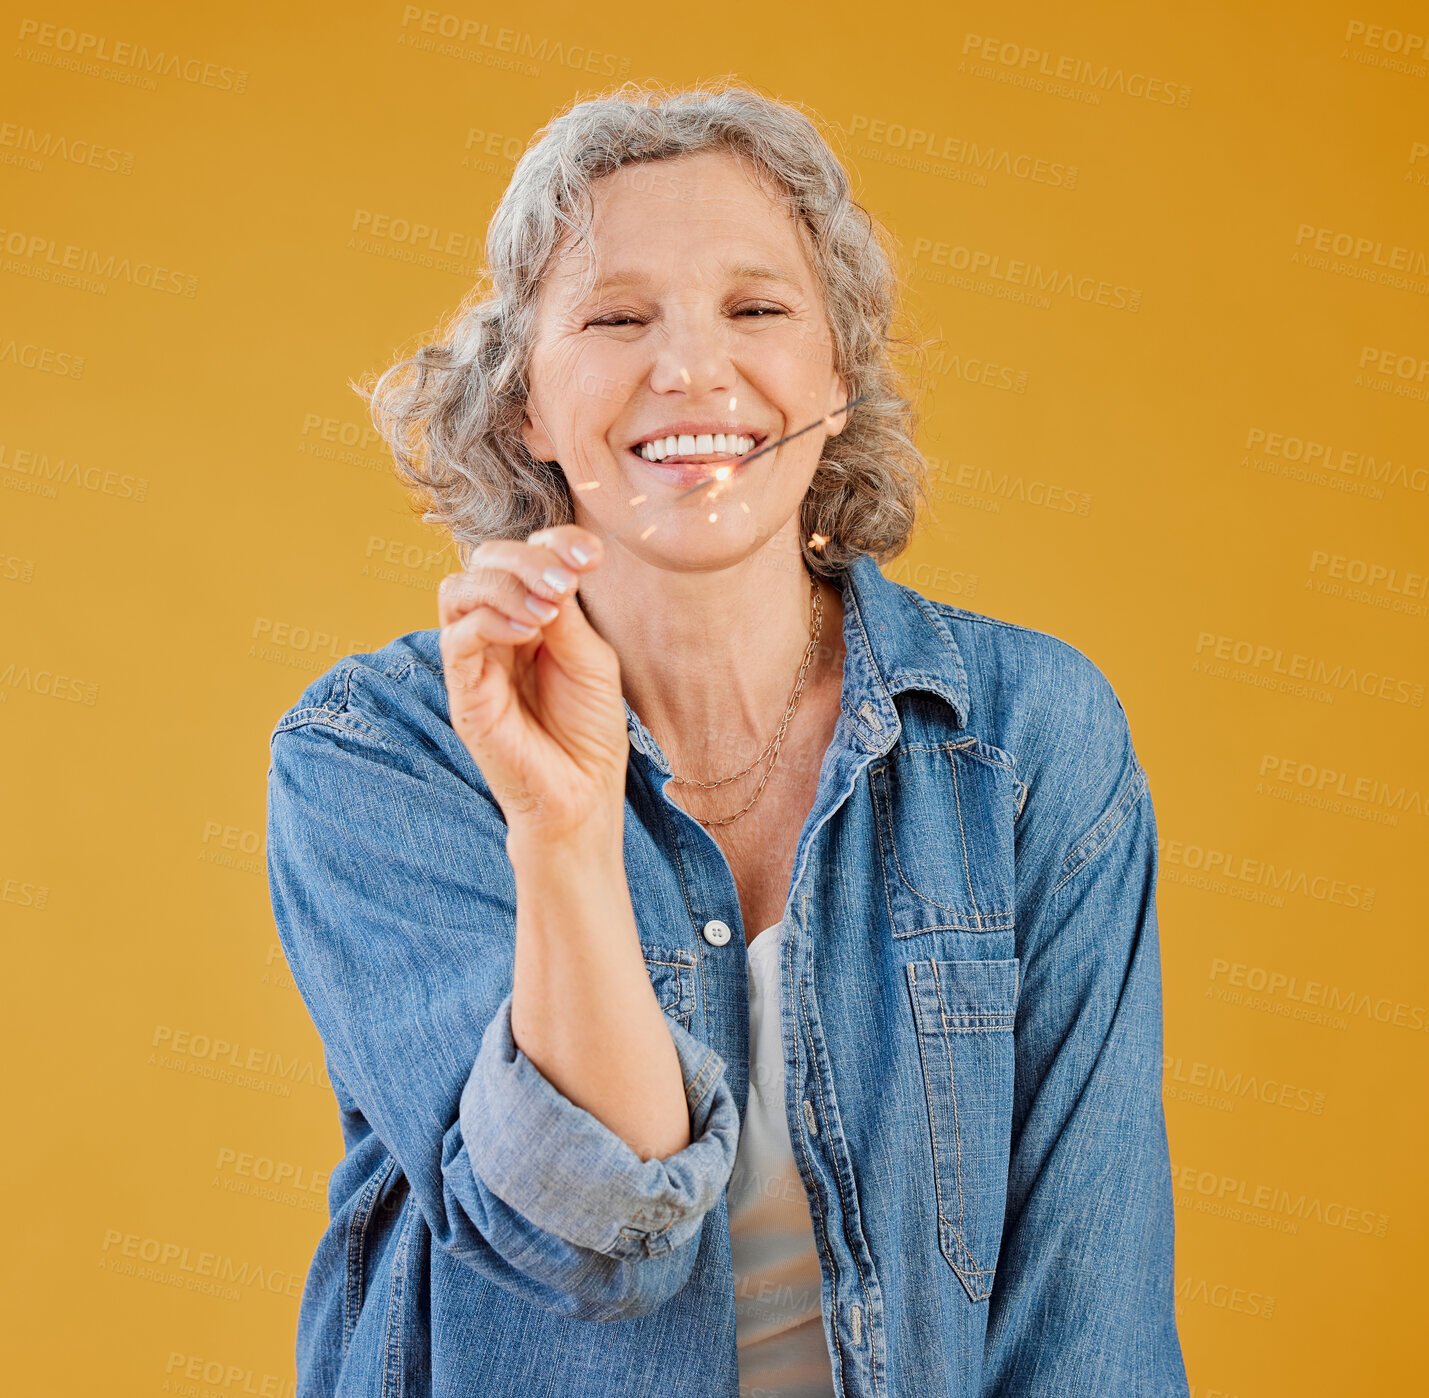 Buy stock photo One happy mature caucasian woman playing with a sparkler on her birthday while posing against a yellow background in the studio. Smiling white lady showing joy and happiness while celebrating